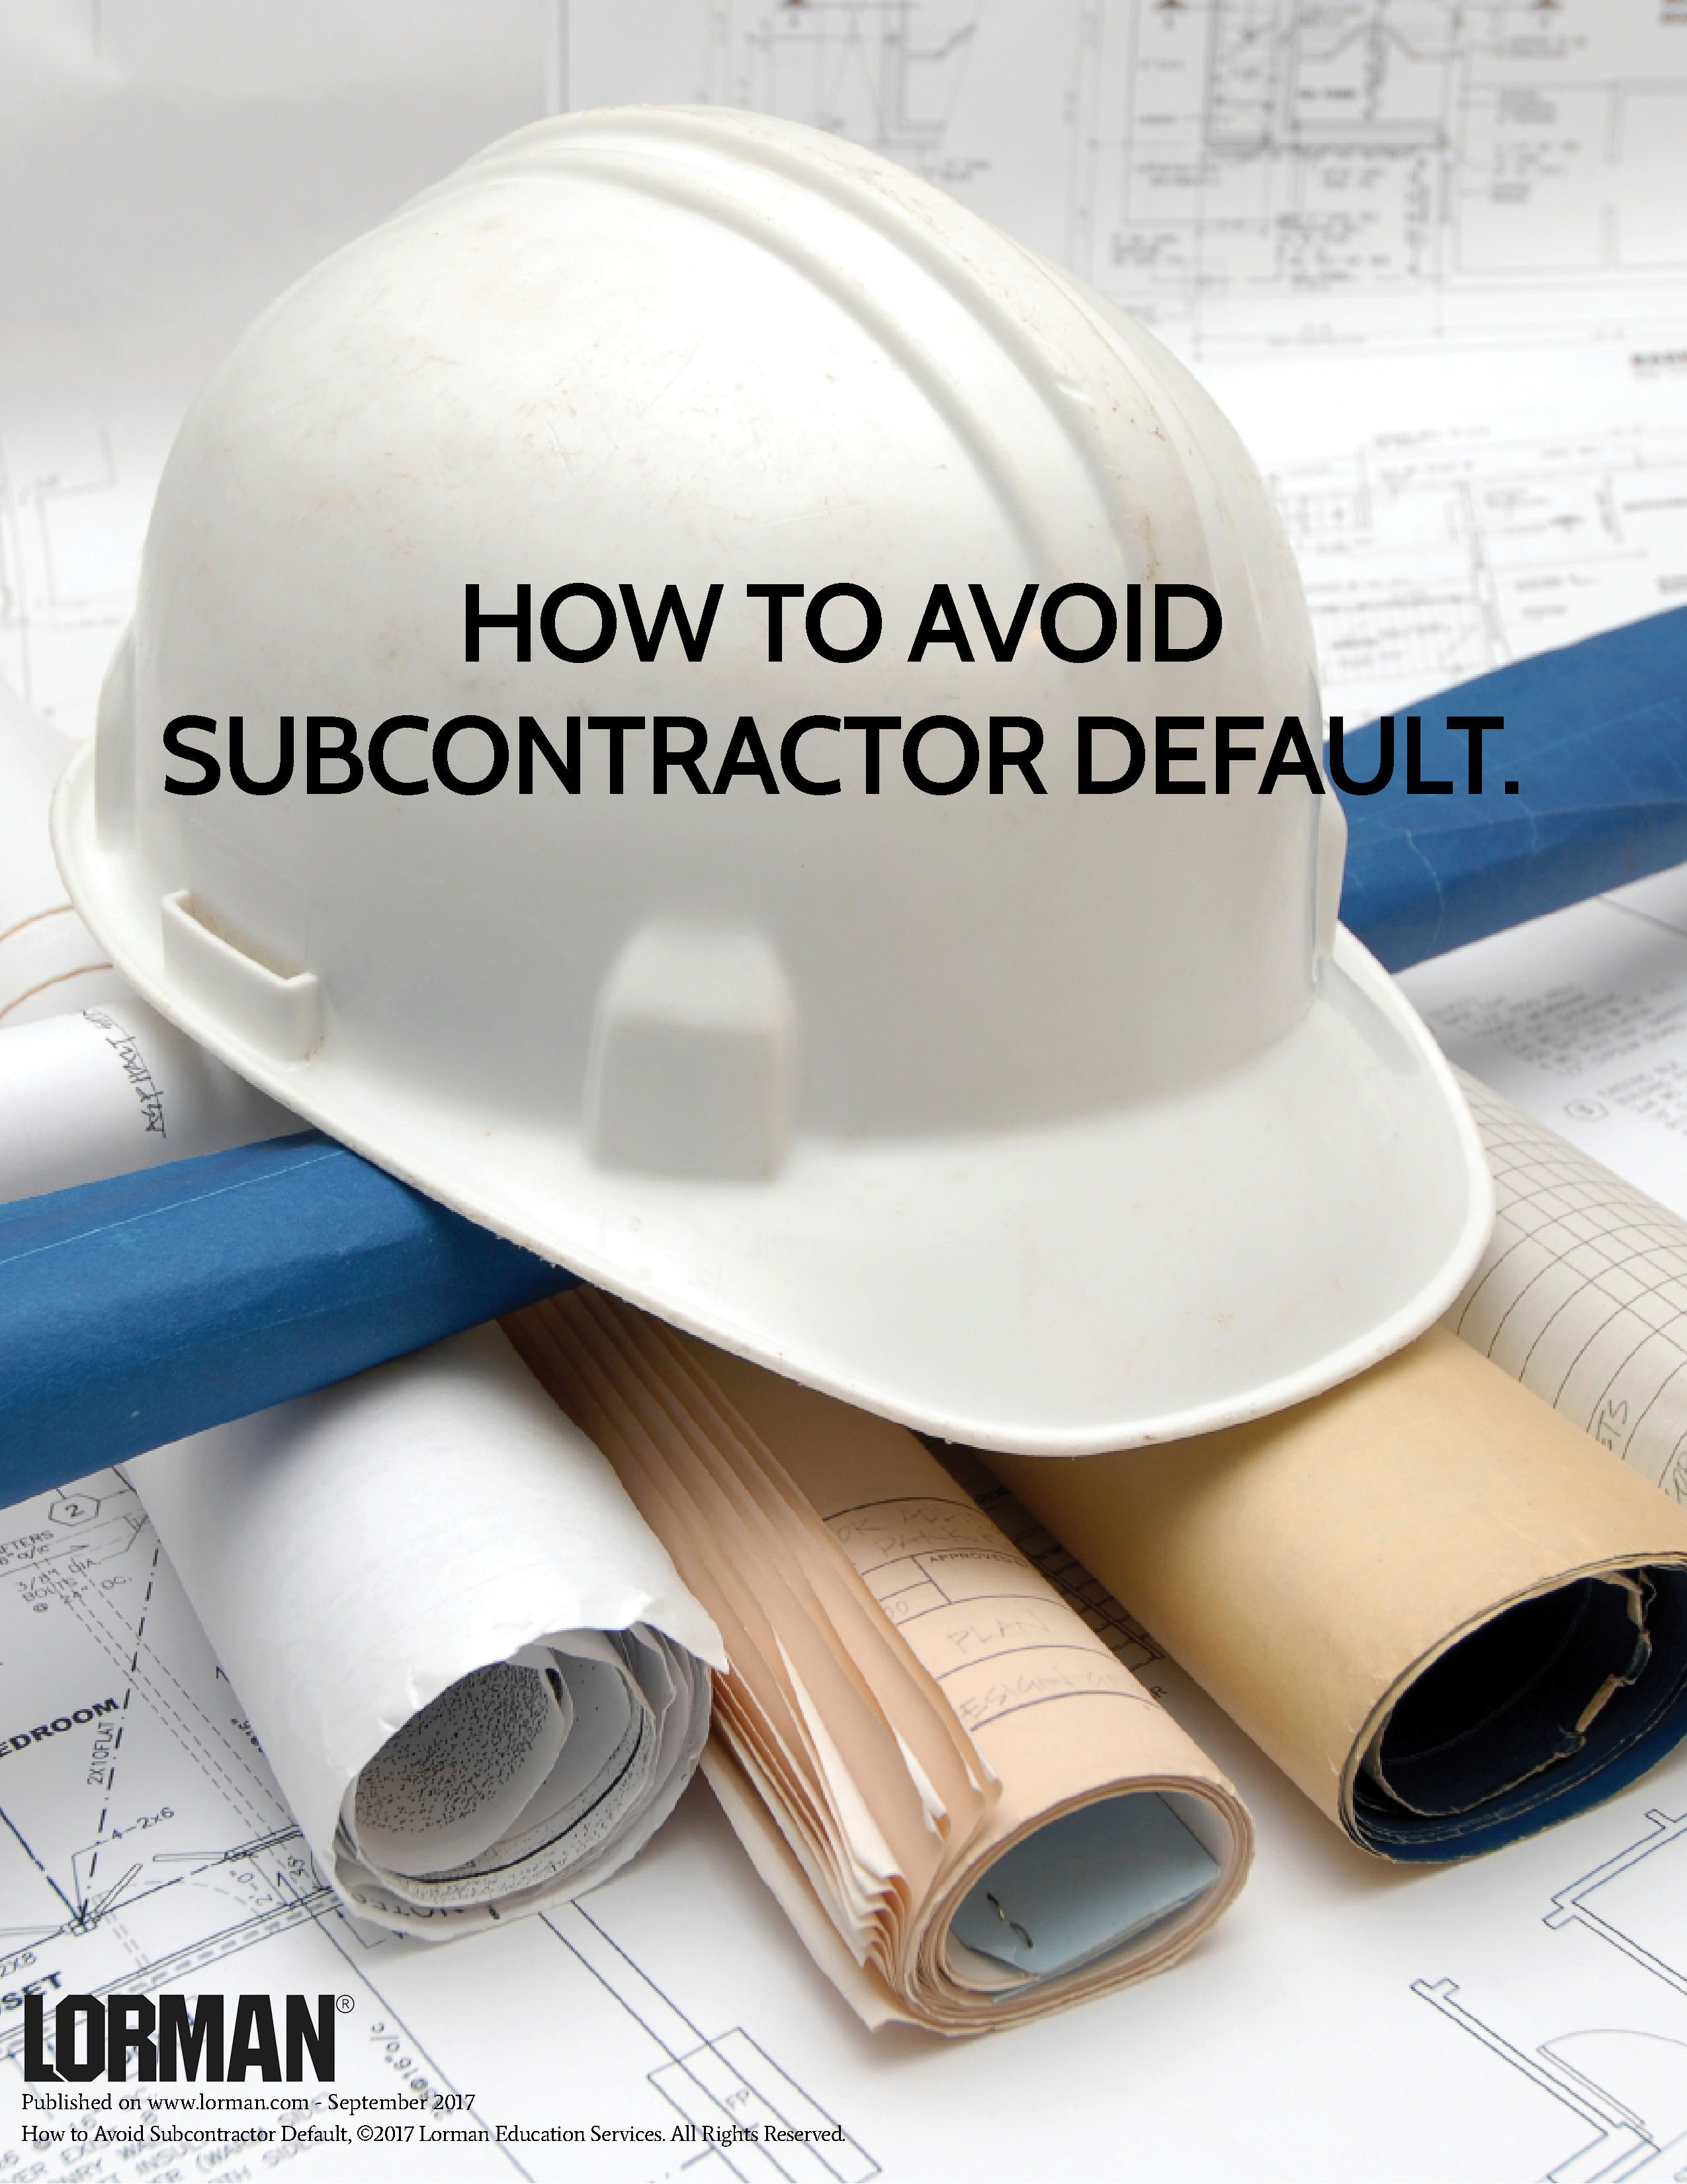 How to Avoid Subcontractor Default